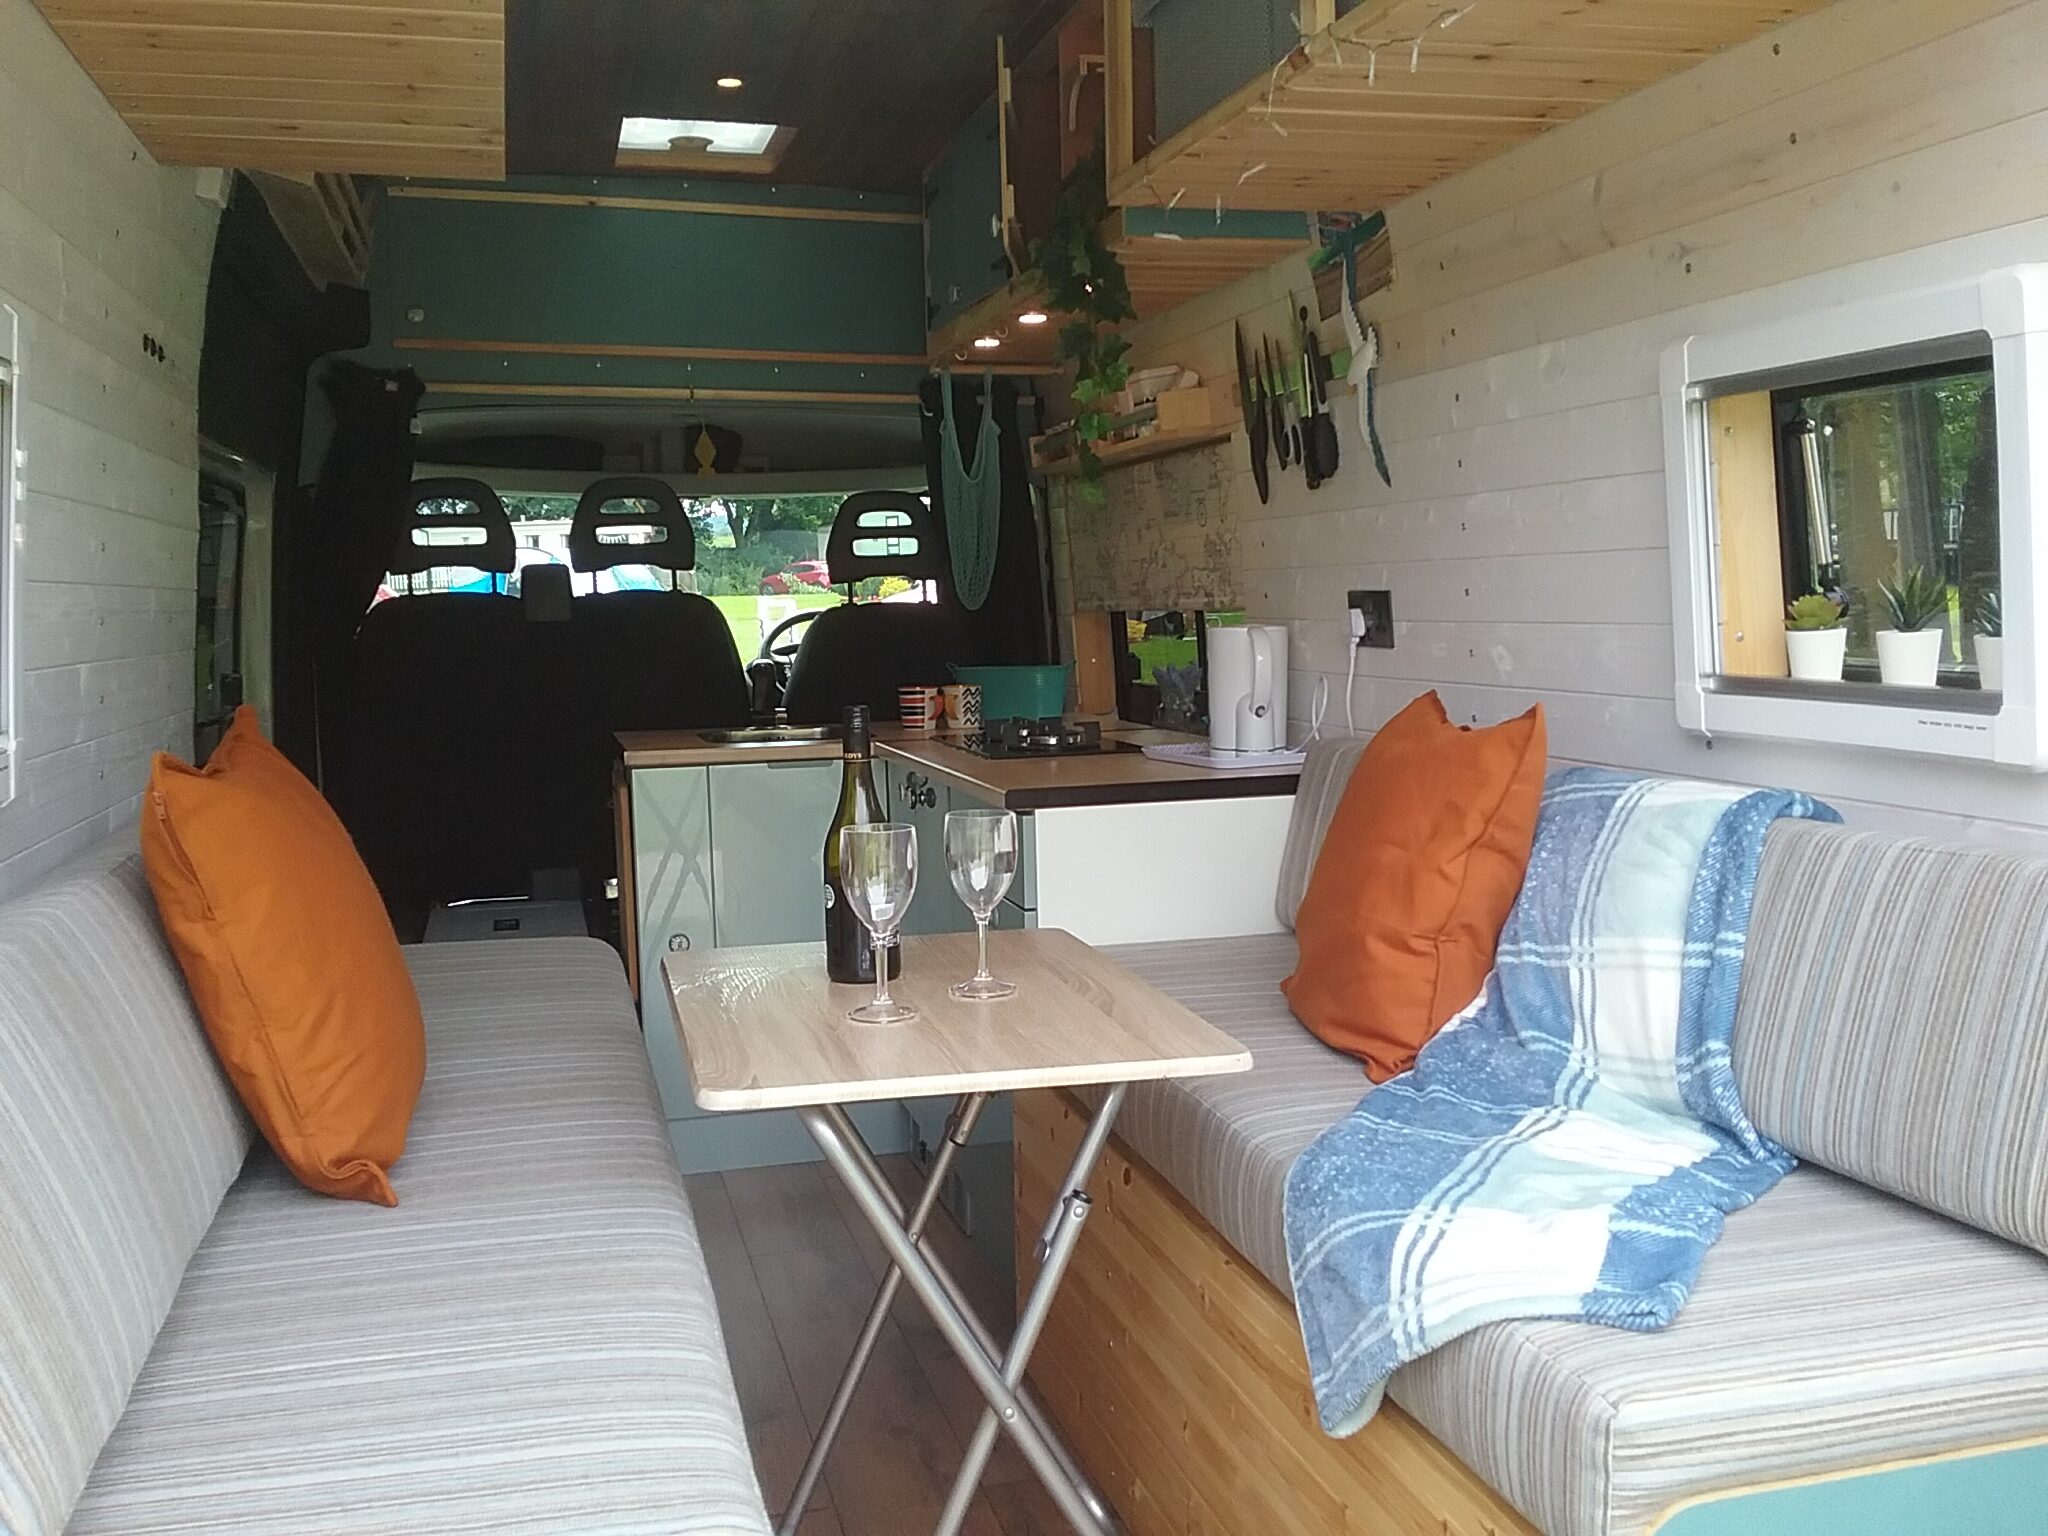 Interior of a cozy, modern van conversion. Features include striped seating with orange cushions, a foldable table set with a wine bottle and glasses, overhead cabinets, a small kitchenette, and a plaid blanket draped over one seat. Plants and kitchen utensils are neatly arranged on the walls.